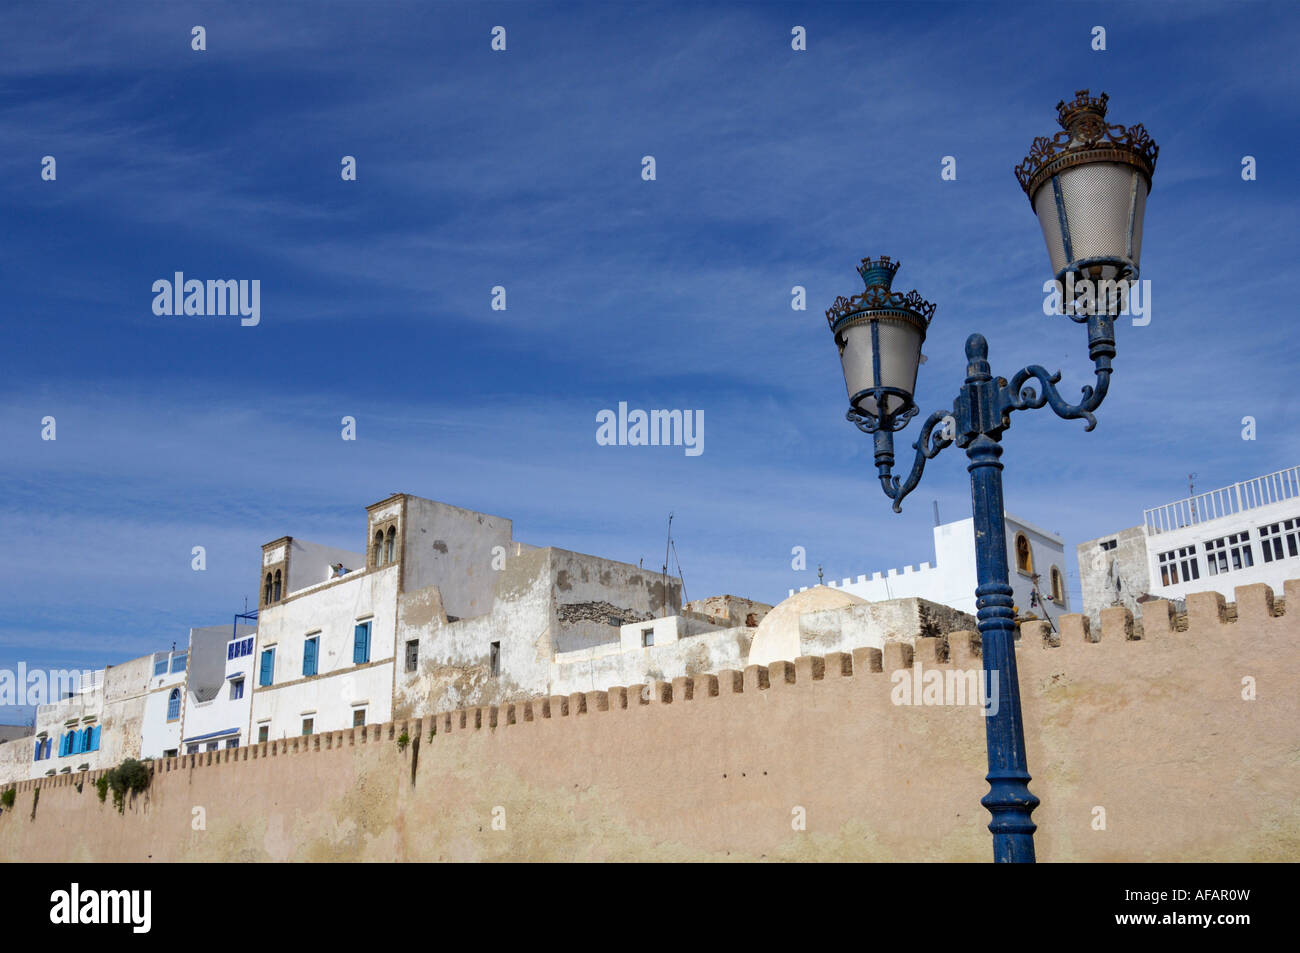 Whitewashed buildings and fortification Essaouira Morocco North Africa Stock Photo